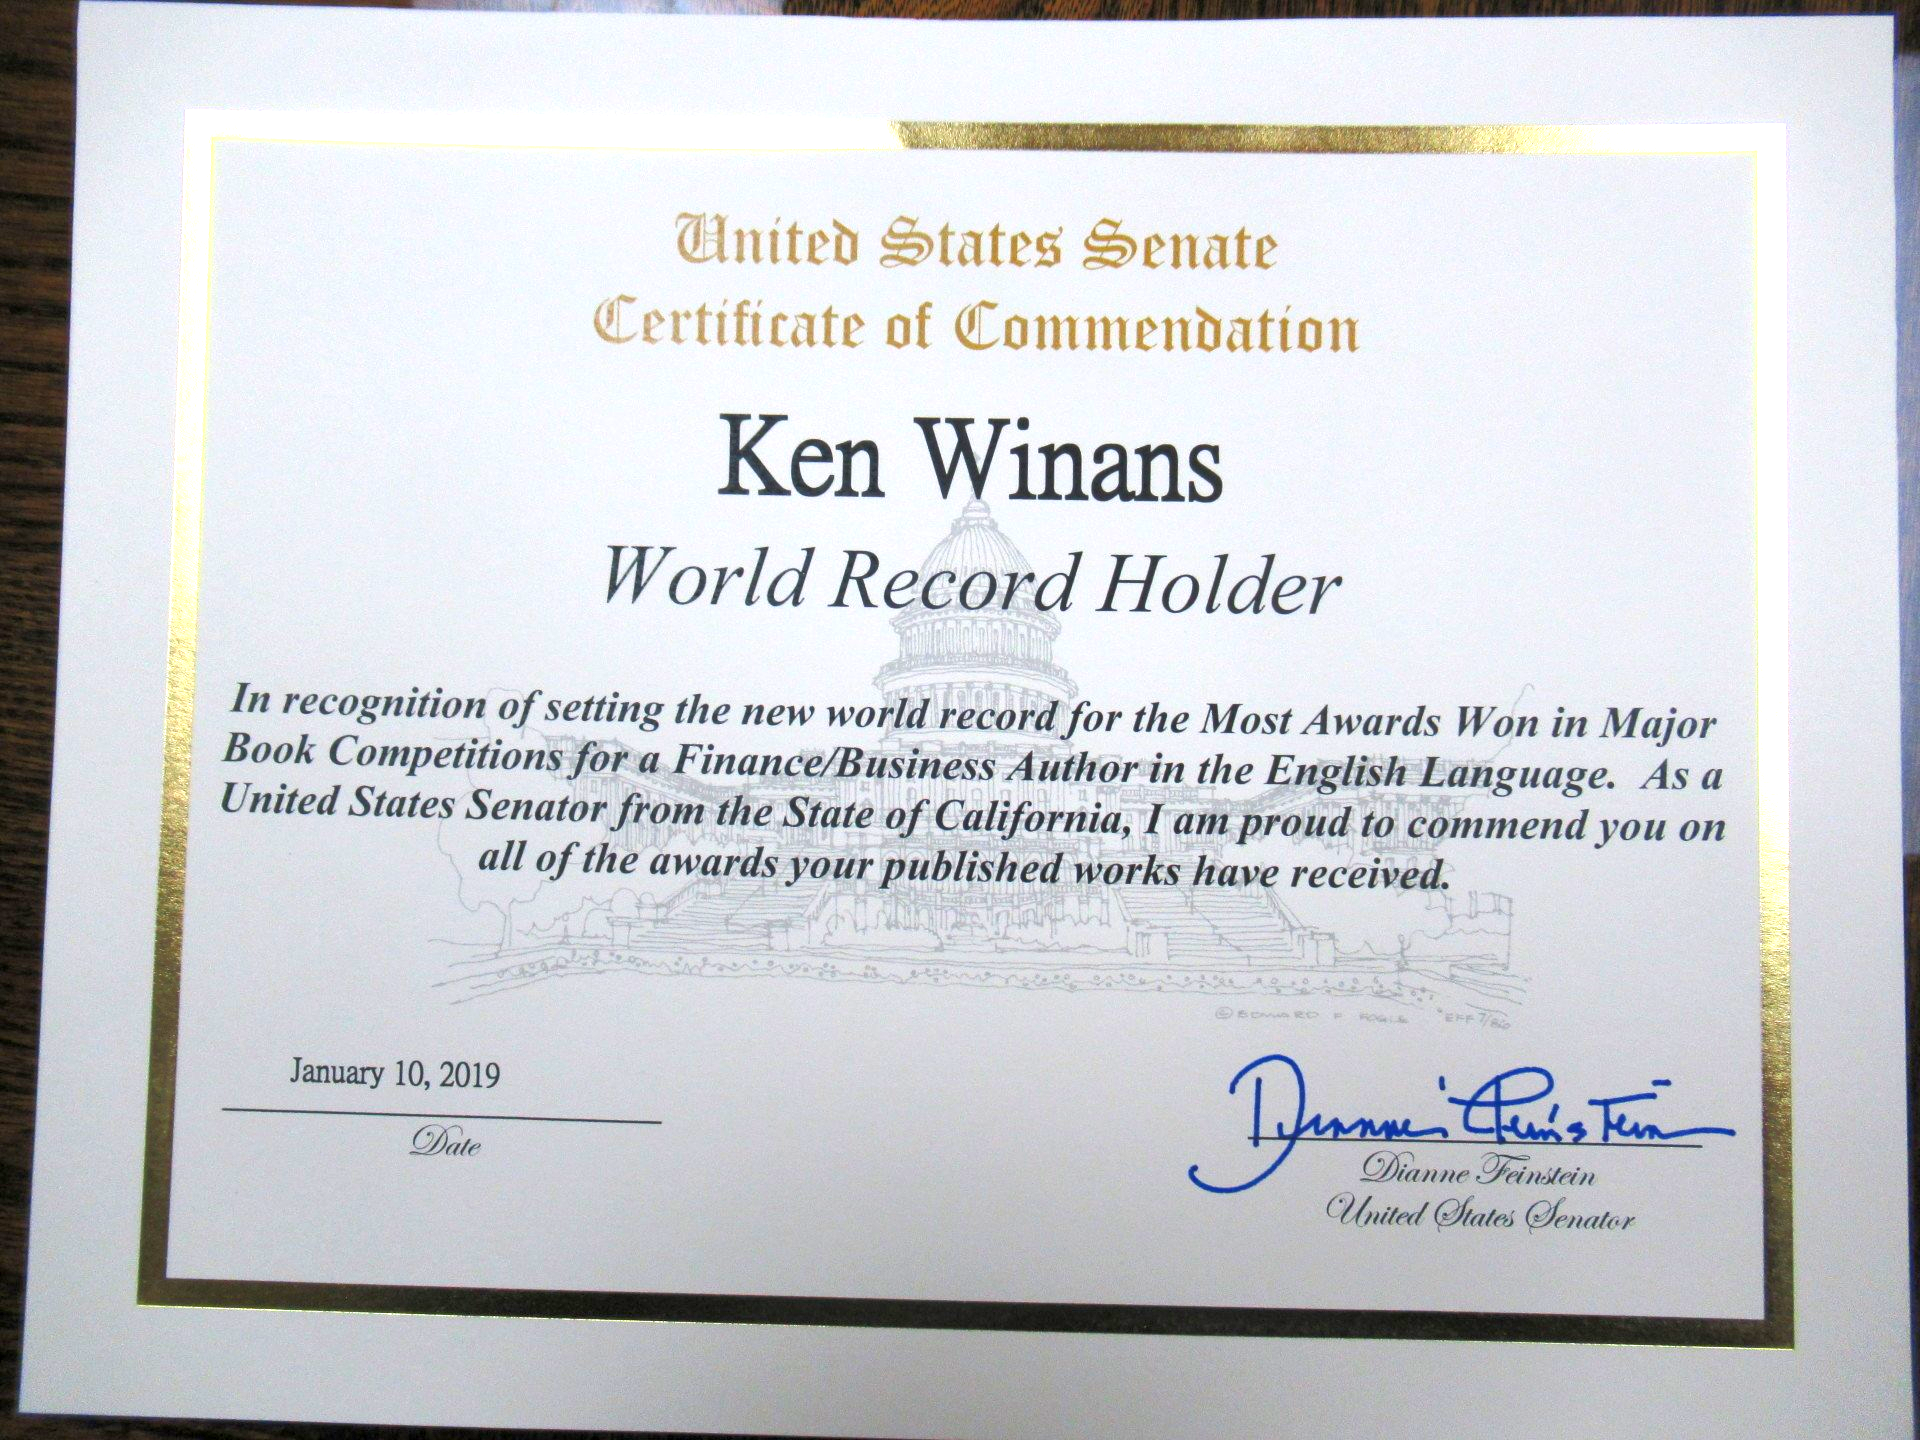 Most Awards Won in Major Book Competitions for a non-fiction Author: Kenneth Winans sets world record